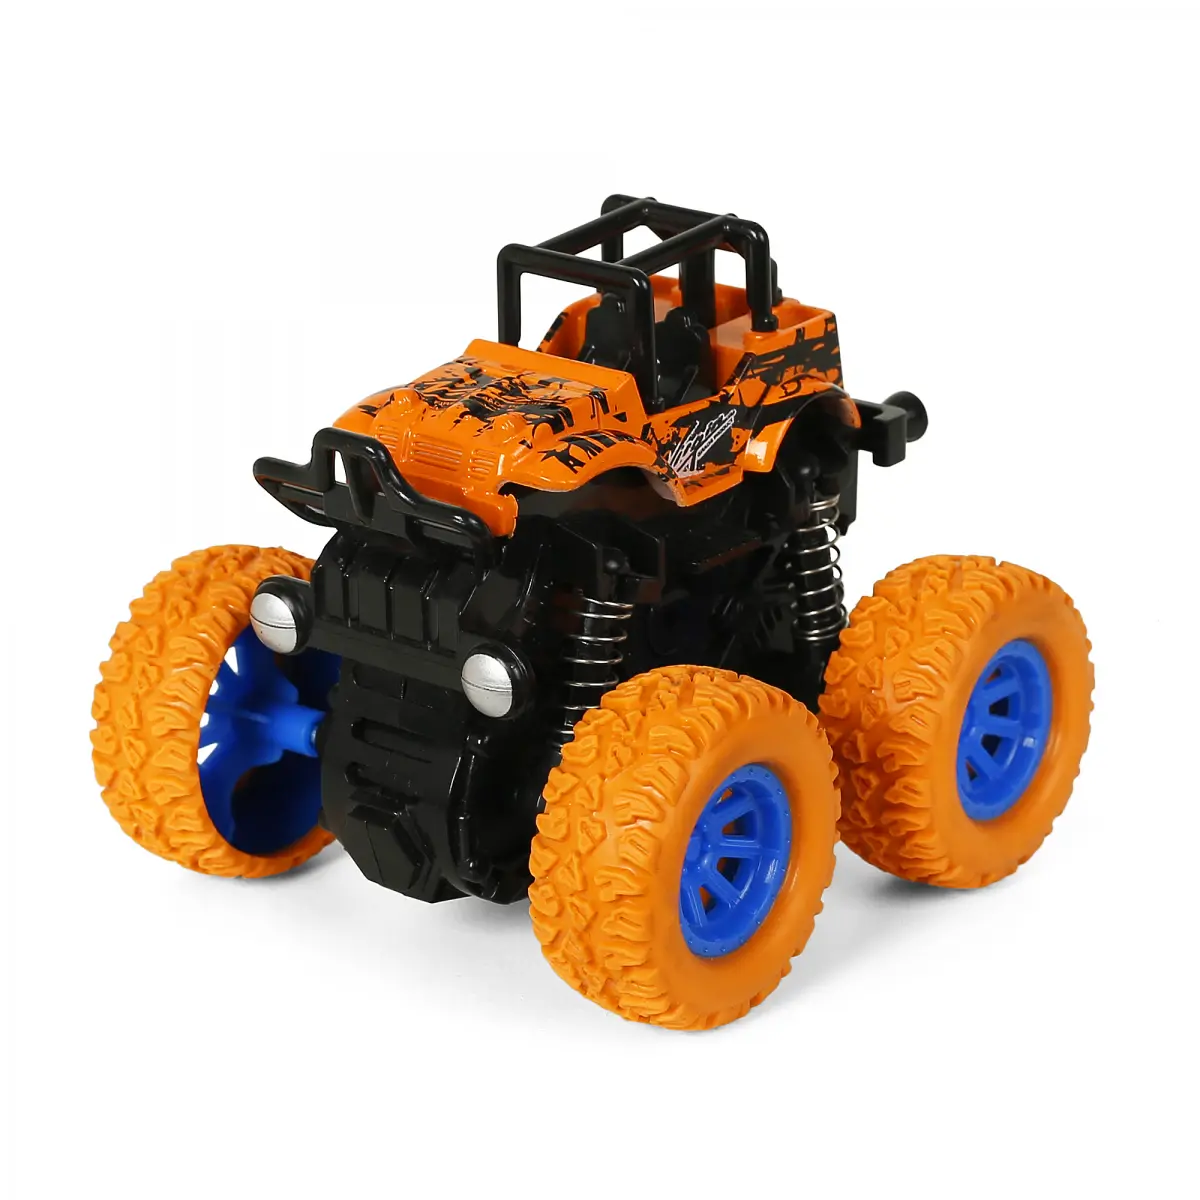 Ralleyz Pull Back Monster Friction Cars Toys Truck, Orange, 6Y+